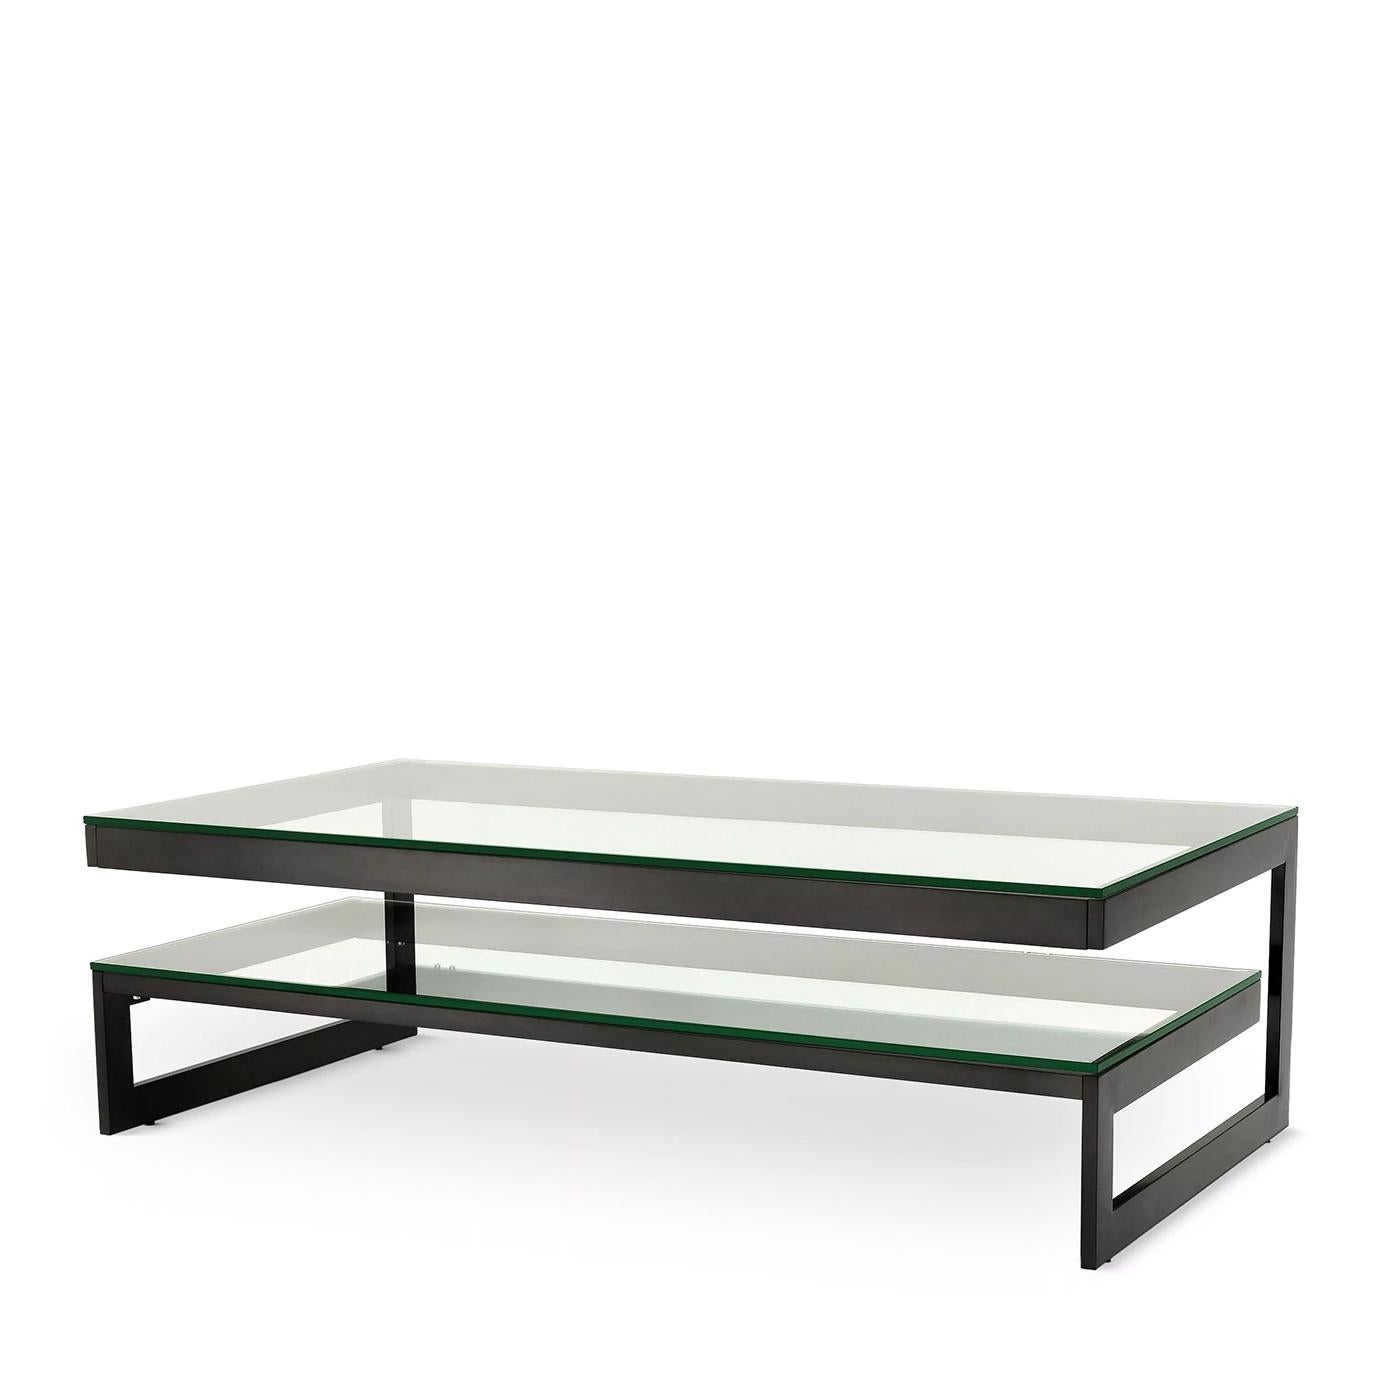 Coffee Table Gema with structure in stainless 
steel in bronze finish. With 2 clear glass tops.